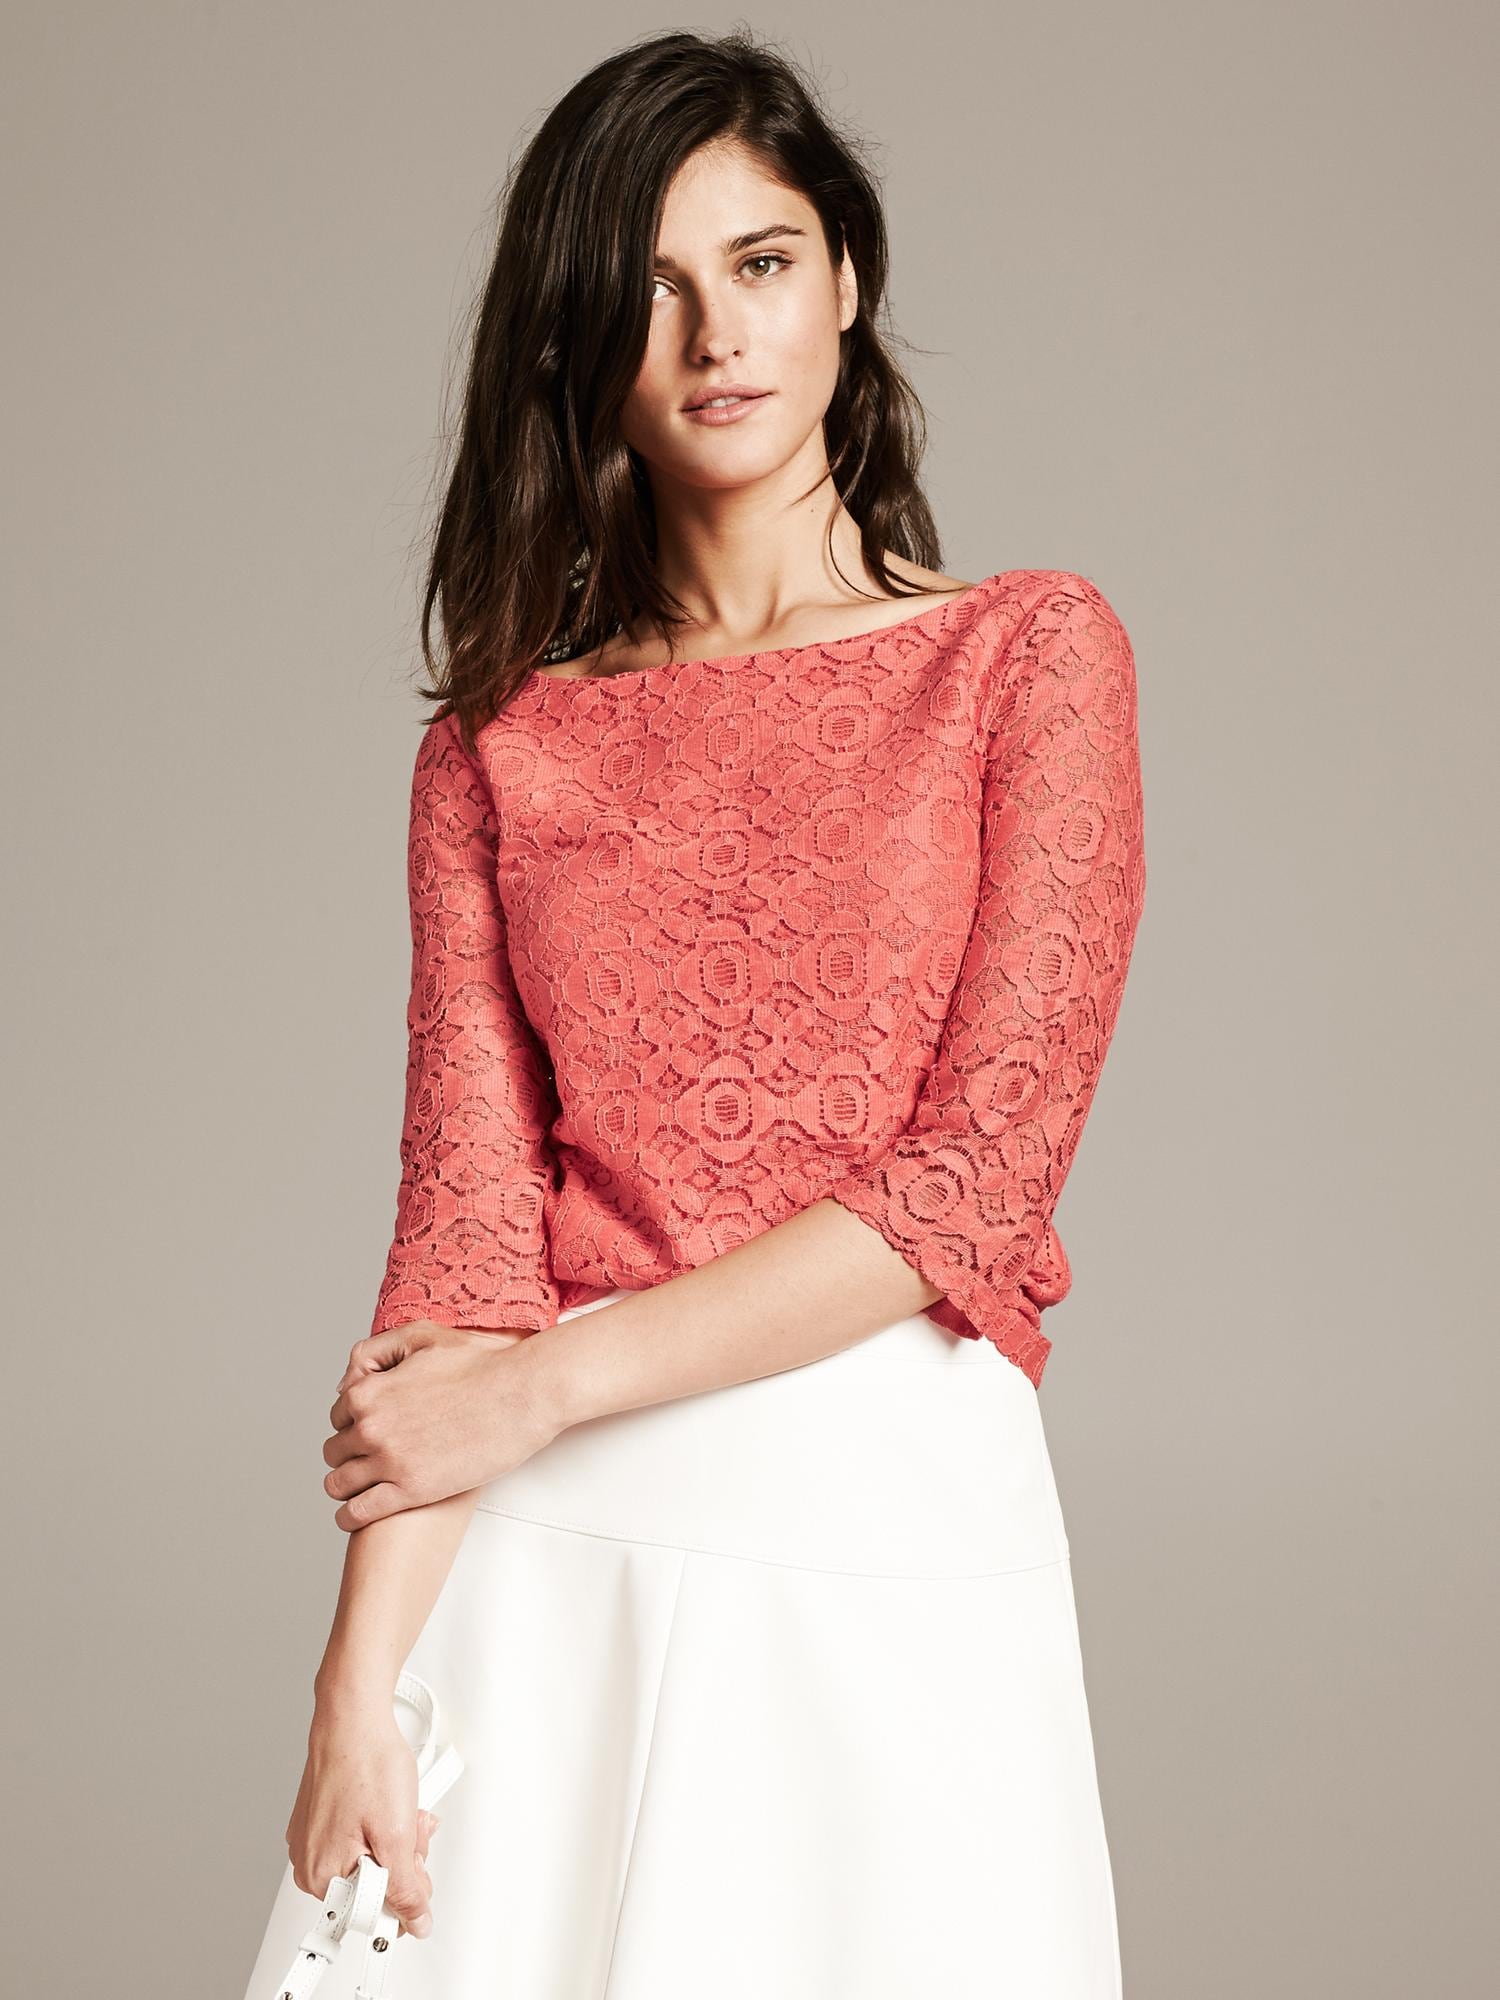 Mosaic Lace Top